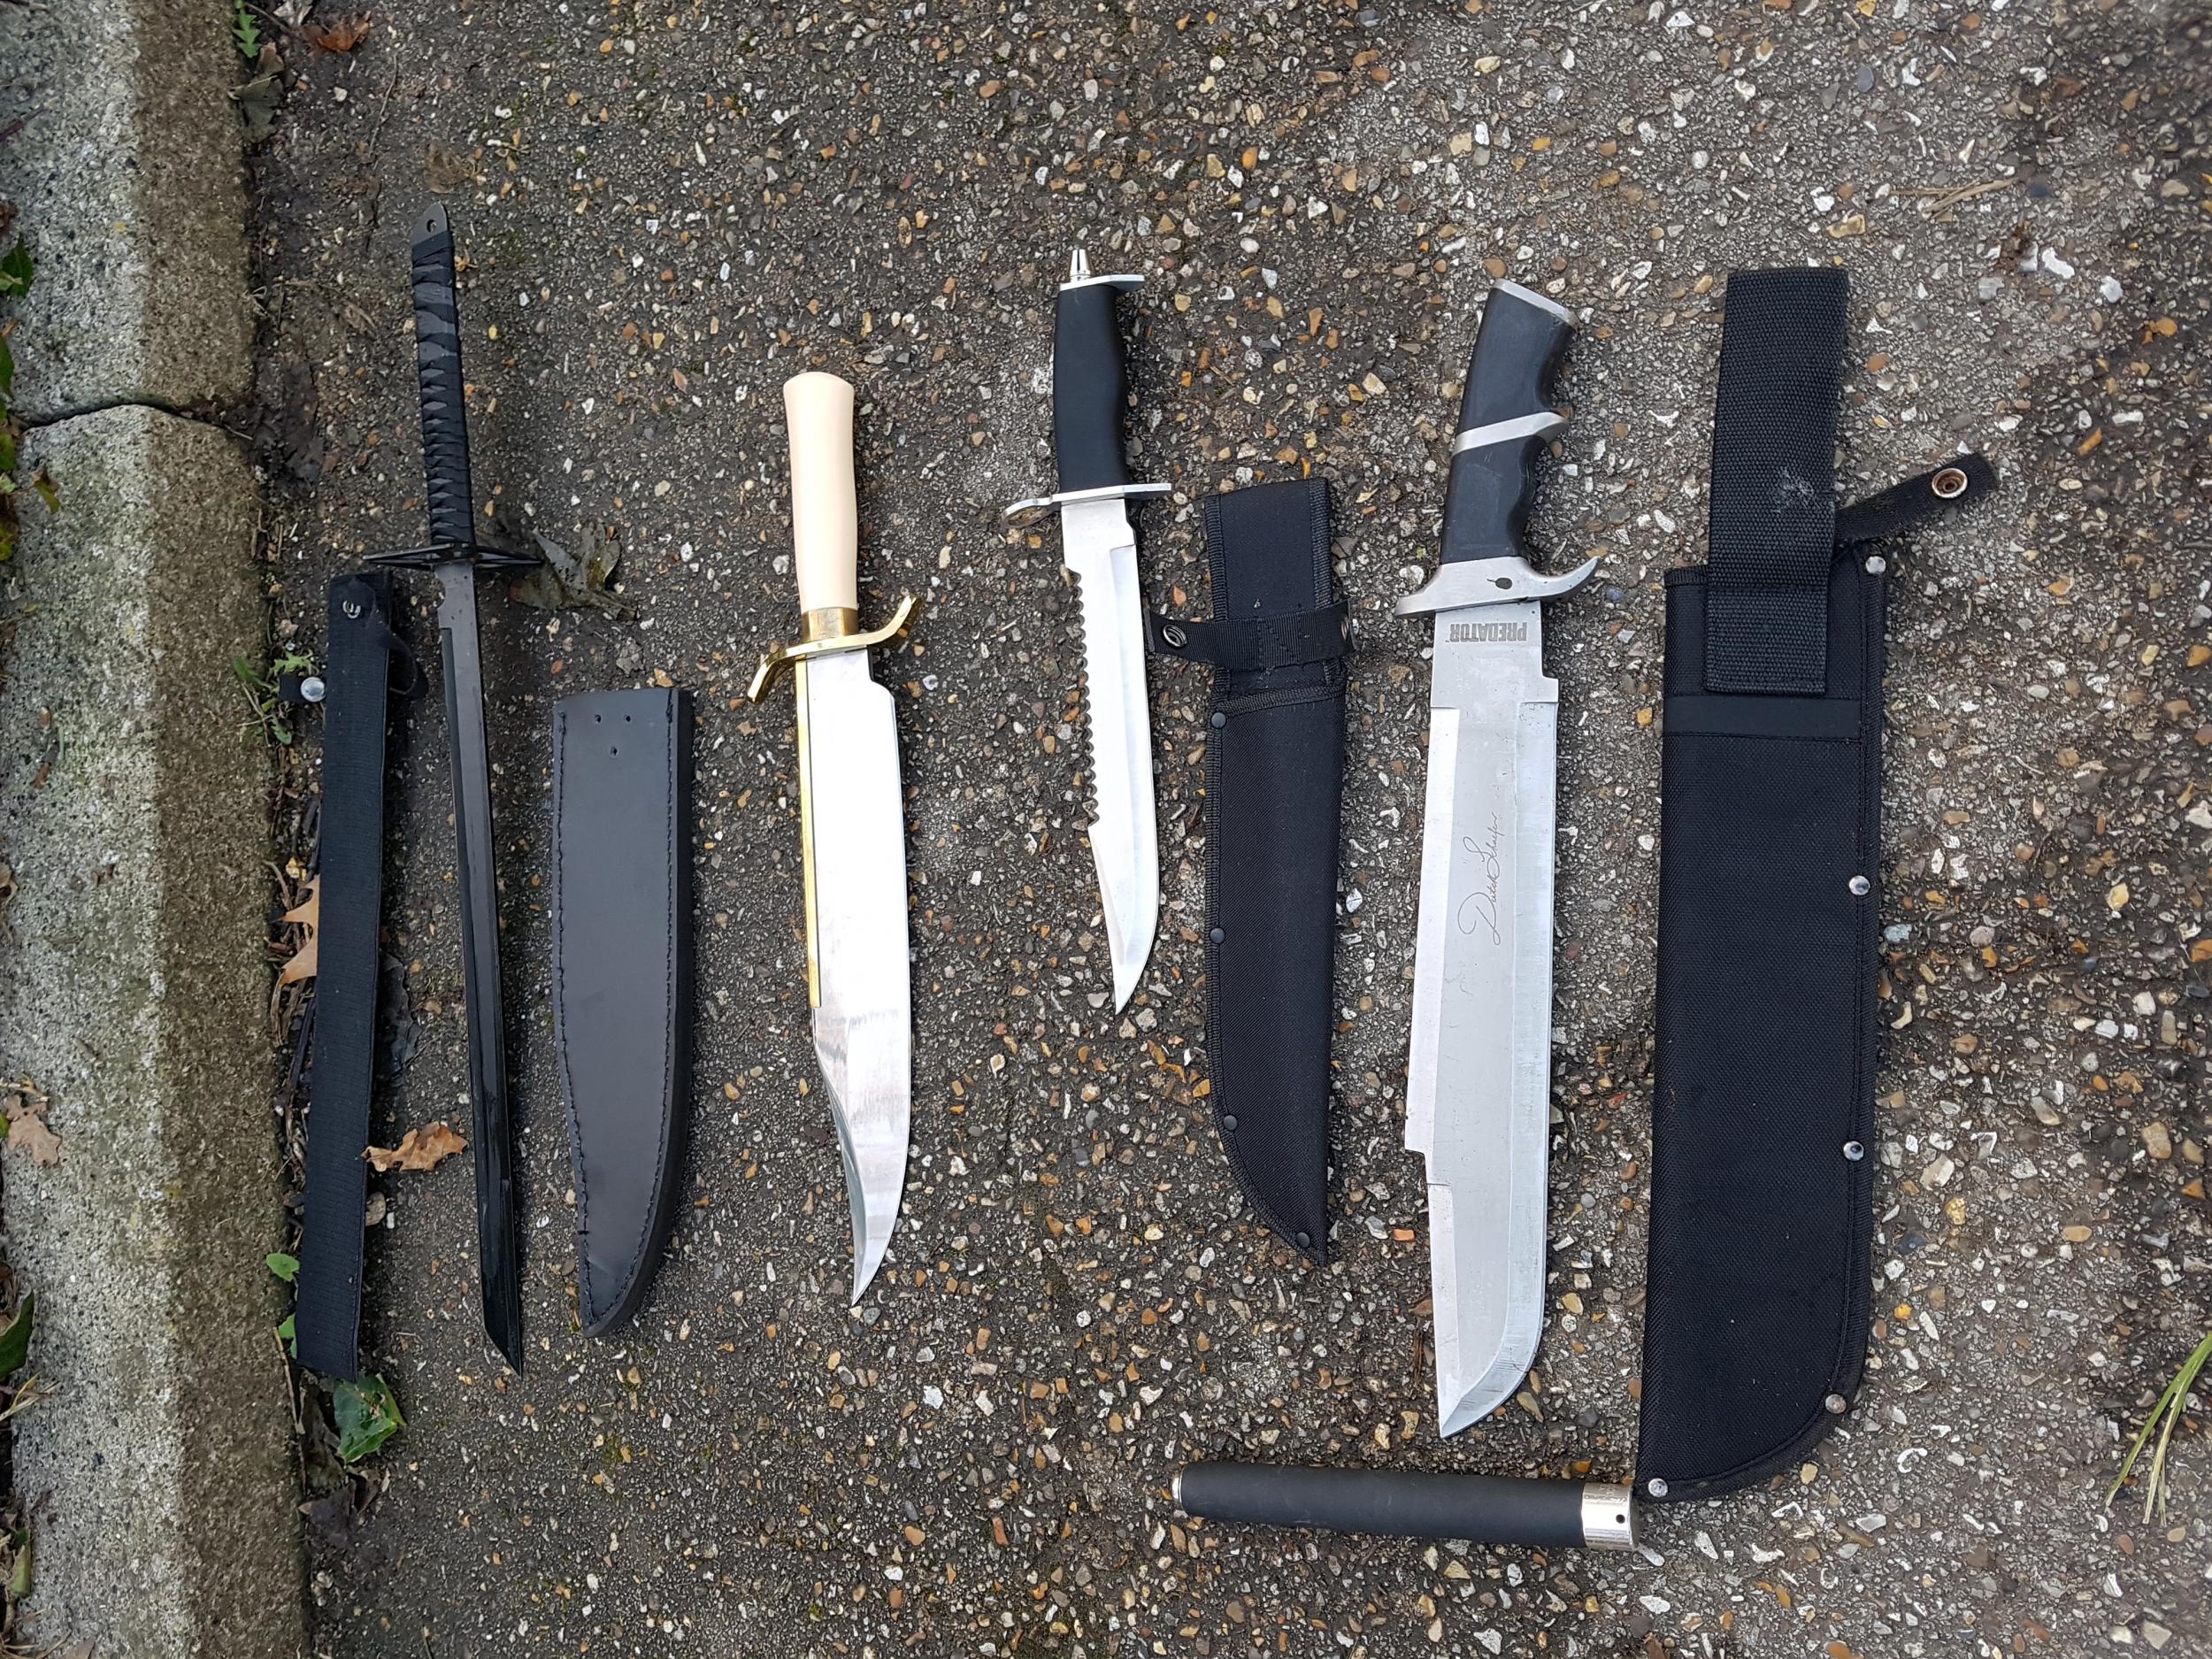 Knives recovered from hedges in a playground and surrounding park in Crouch Hill, London, in January 2020